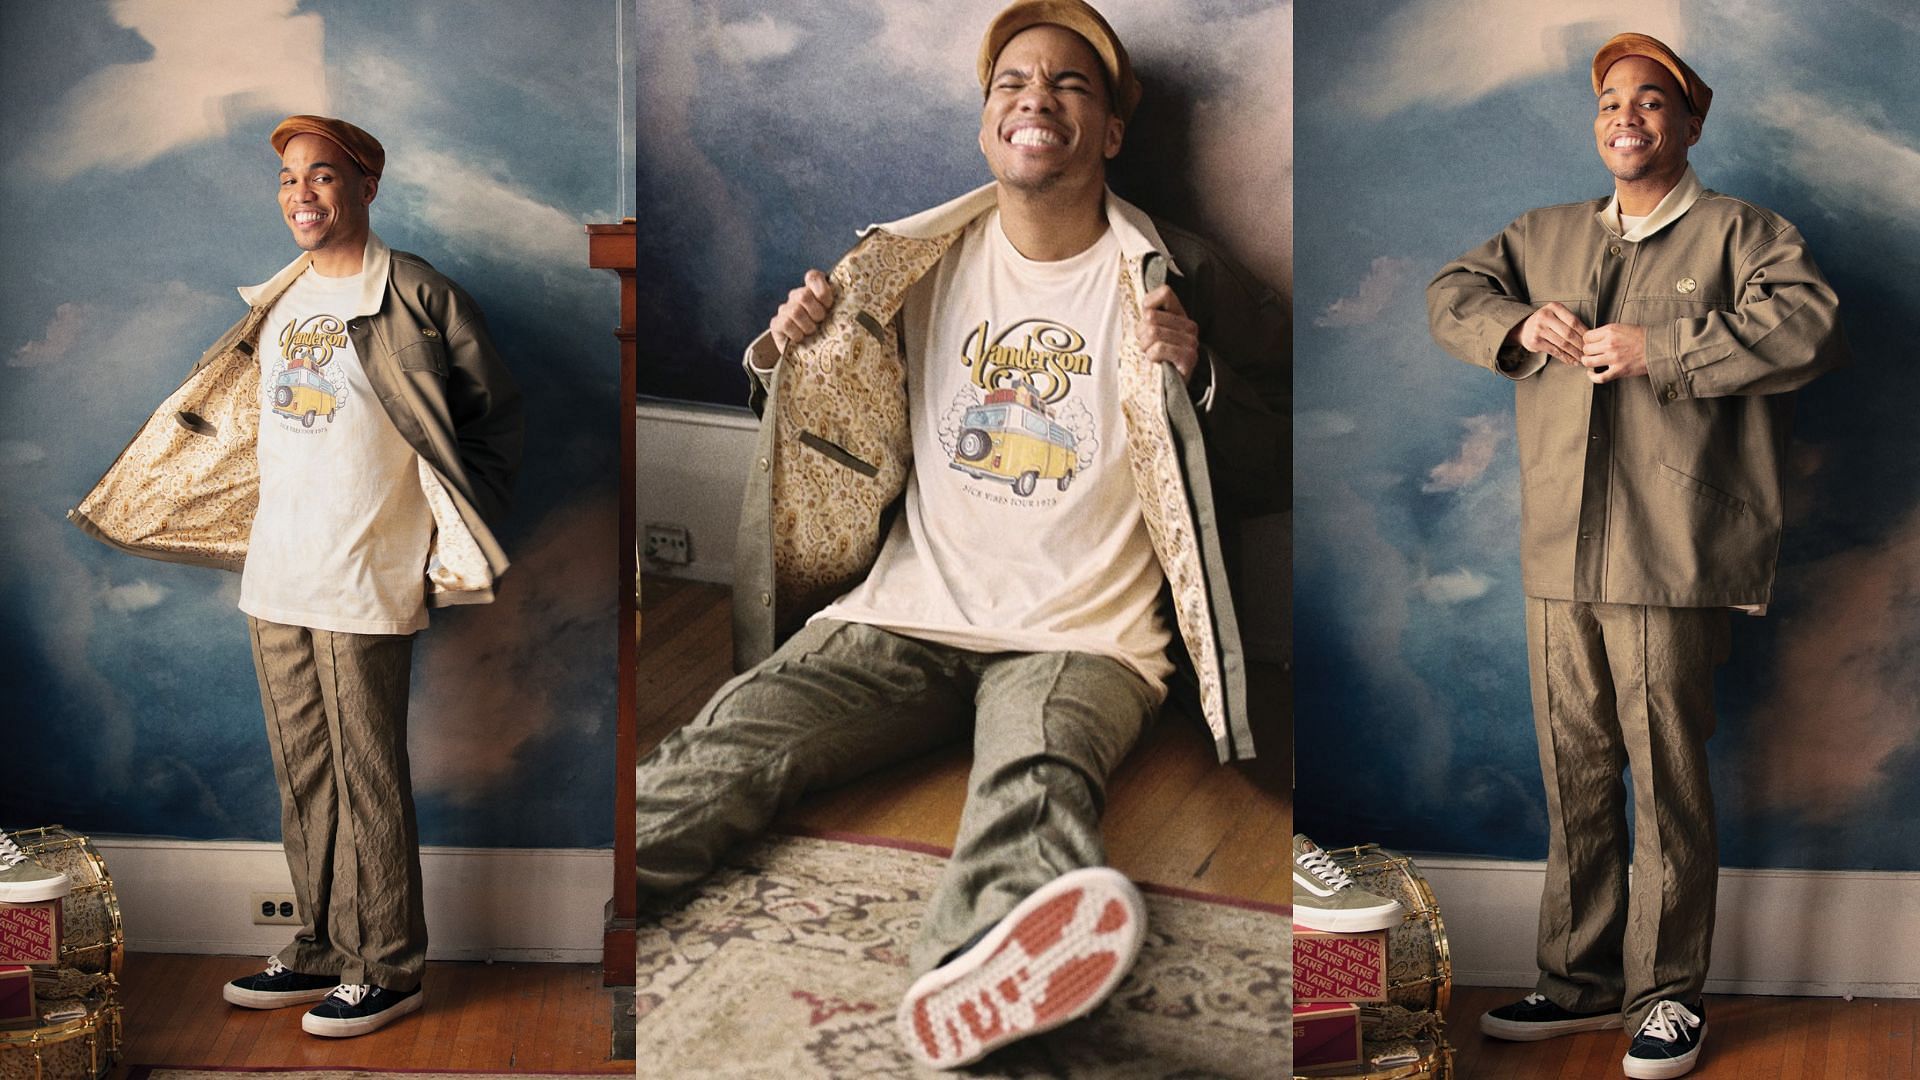 The collab&#039;s campaign is labeled Vanderson (Image via Vans)